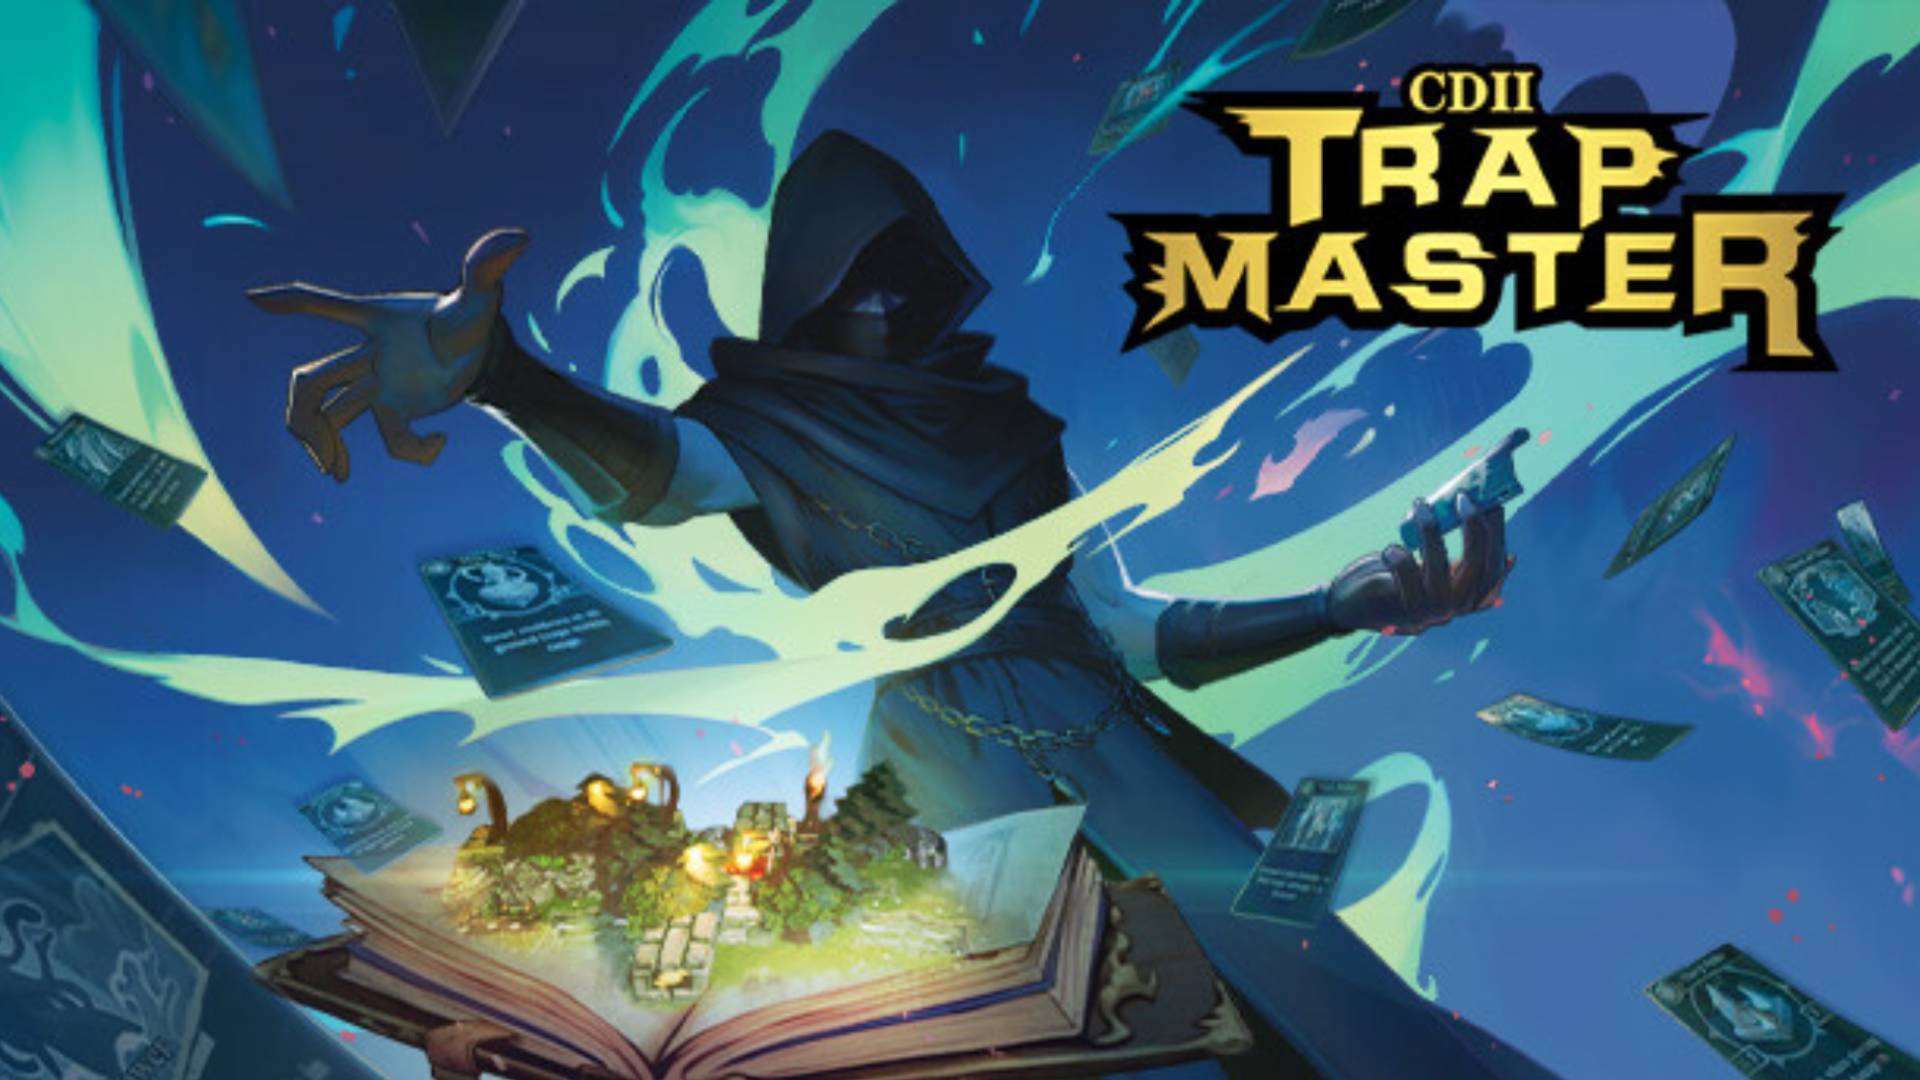 Banner of CD 2- Trap Master 